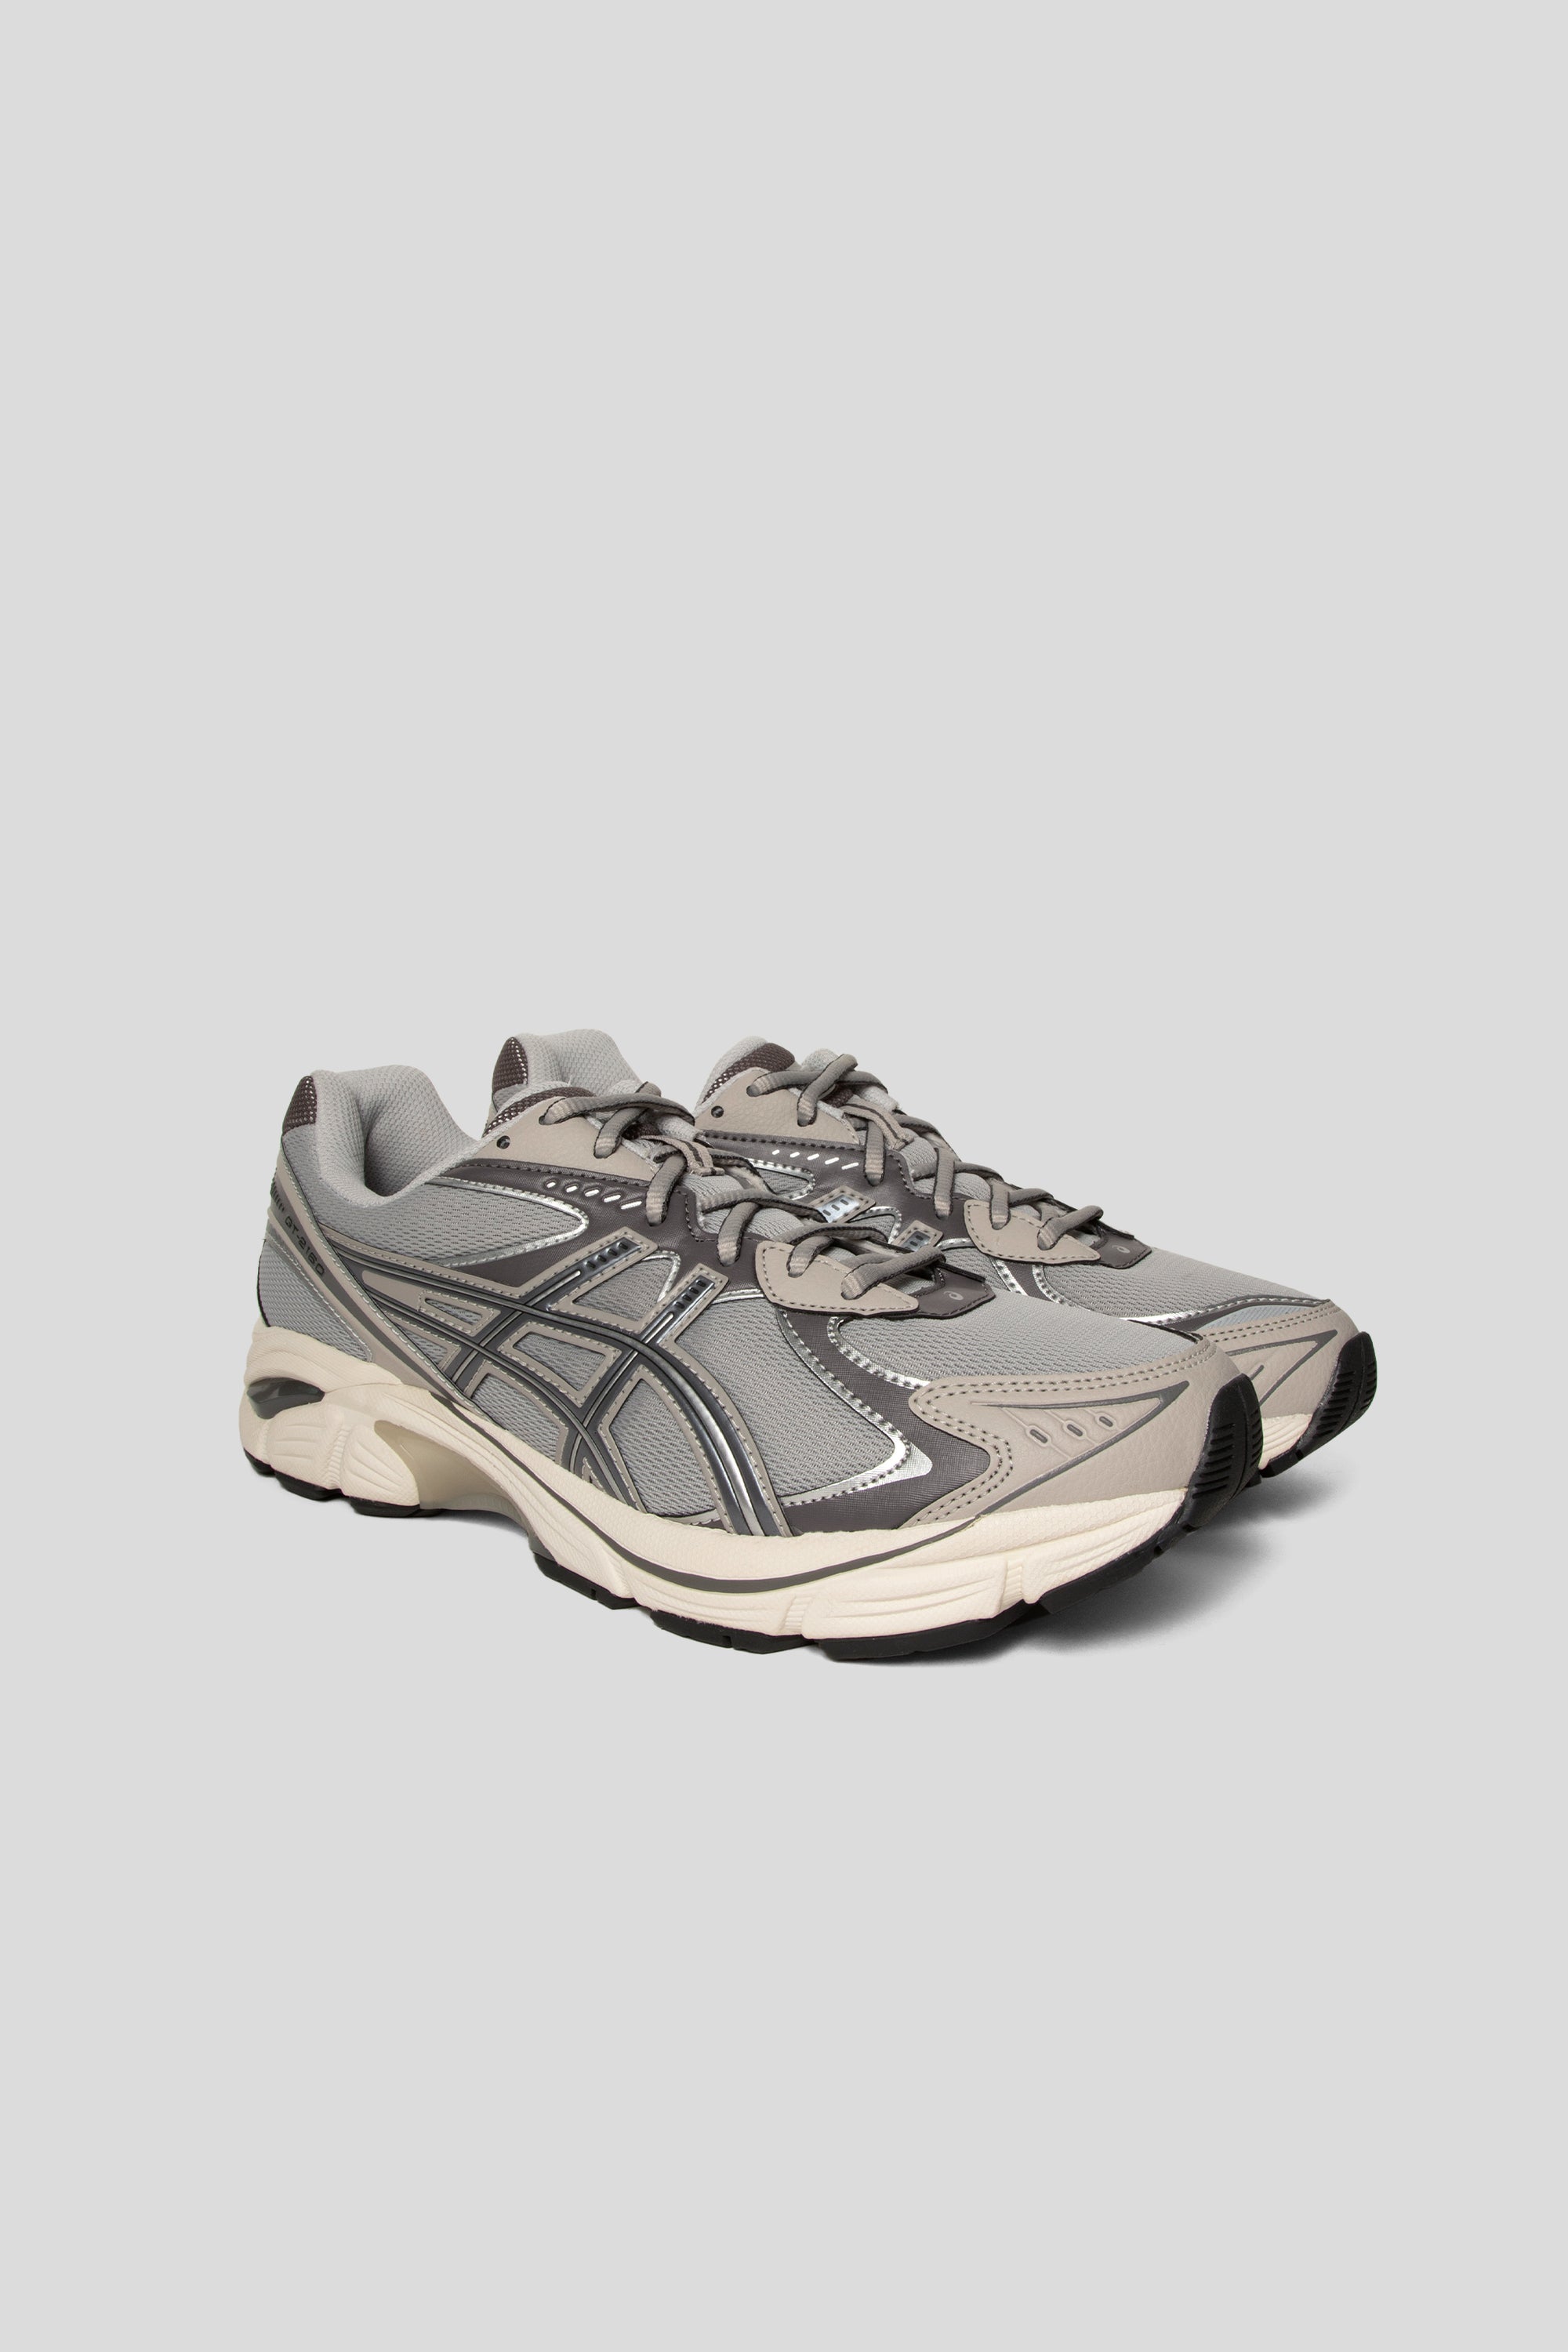 Asics GT-2160 in Oyster Grey/Carbon